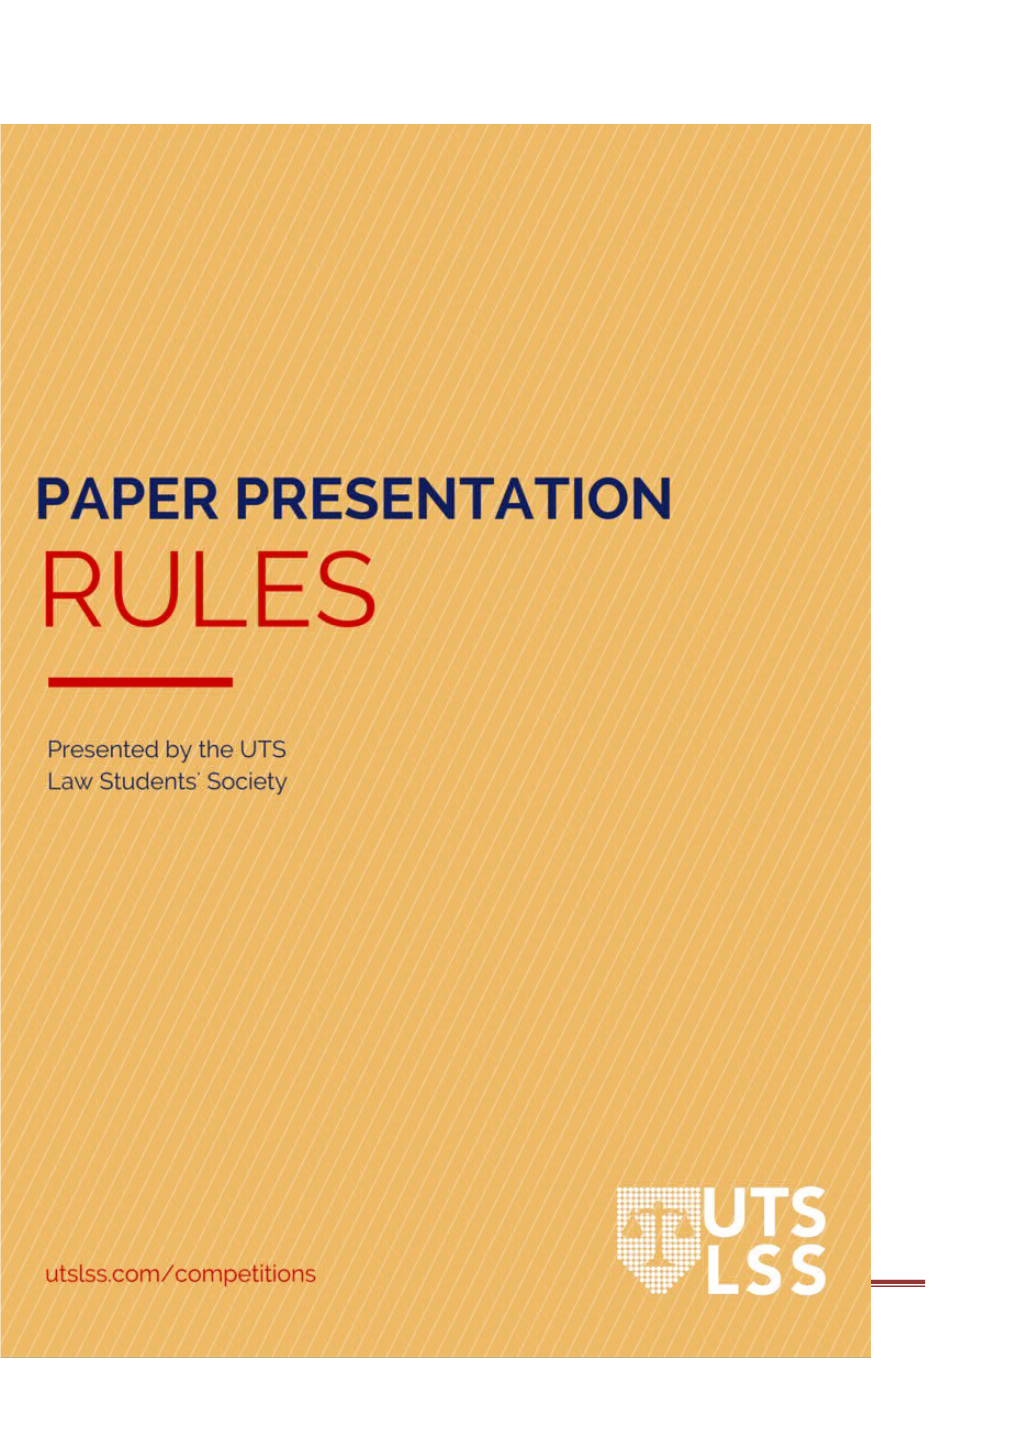 Procedure of the Paper Presentation Competition